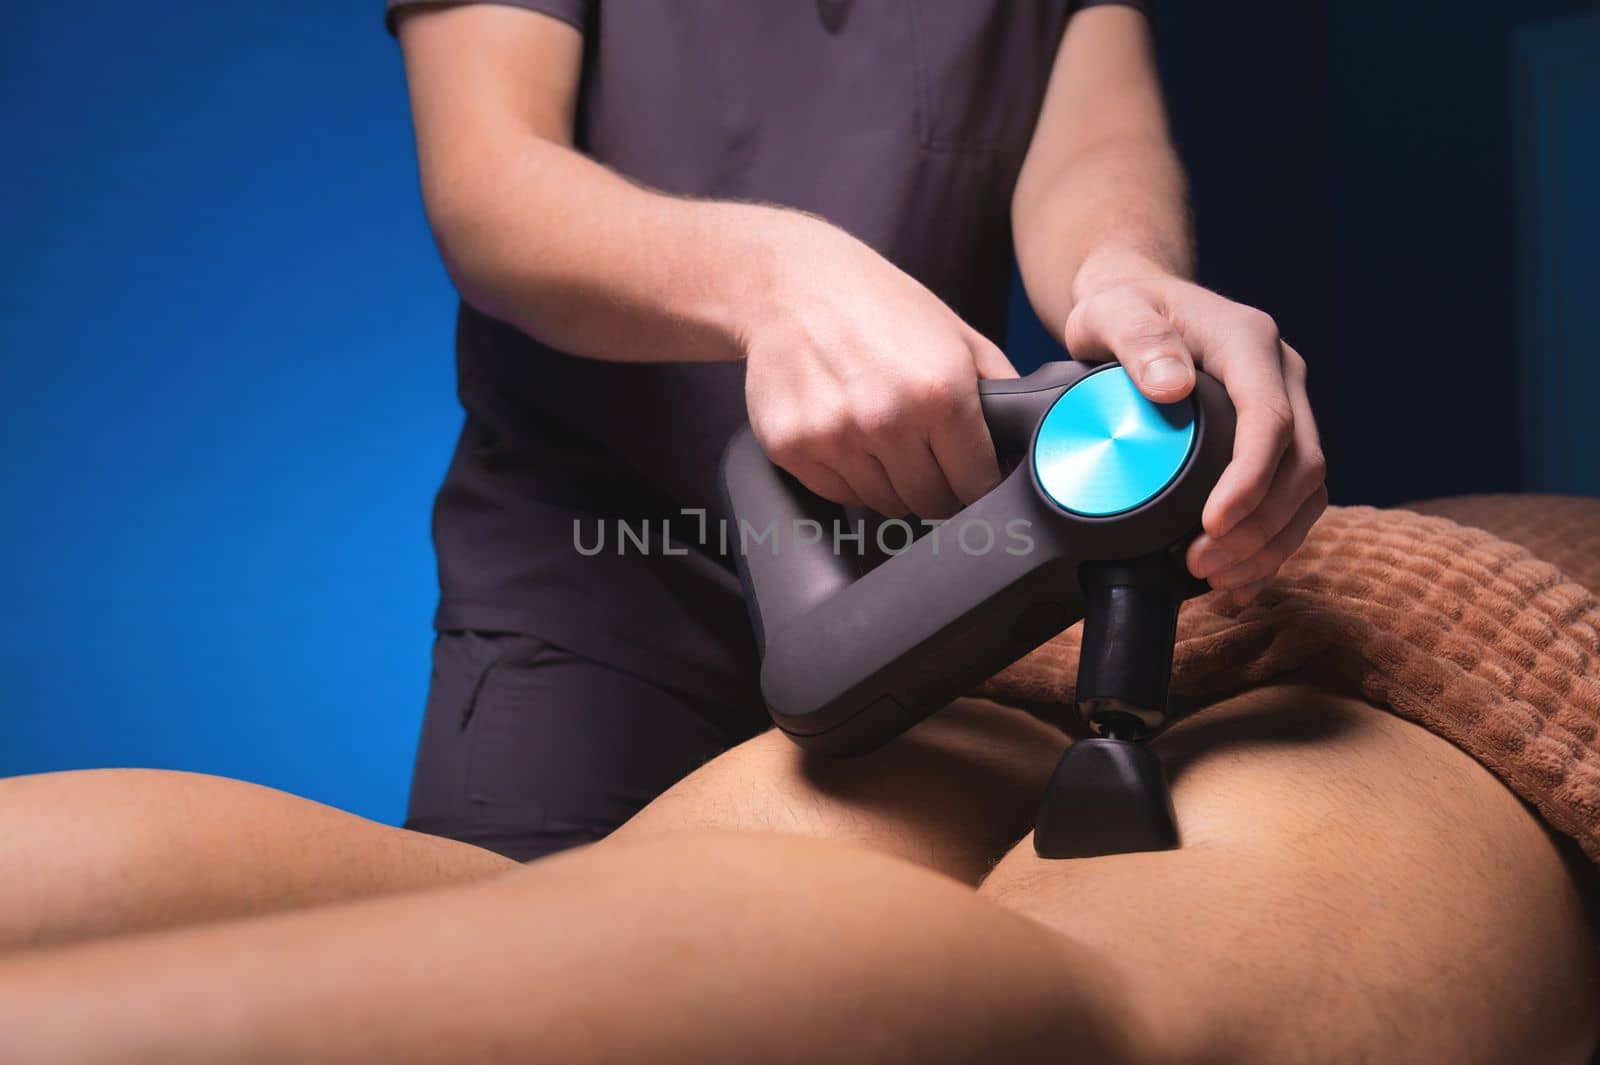 Close-up of unrecognizable professional male masseur massaging leg calf muscles using massage gun percussion tool of muscular athlete man, on spa treatment lying on back in massage table.